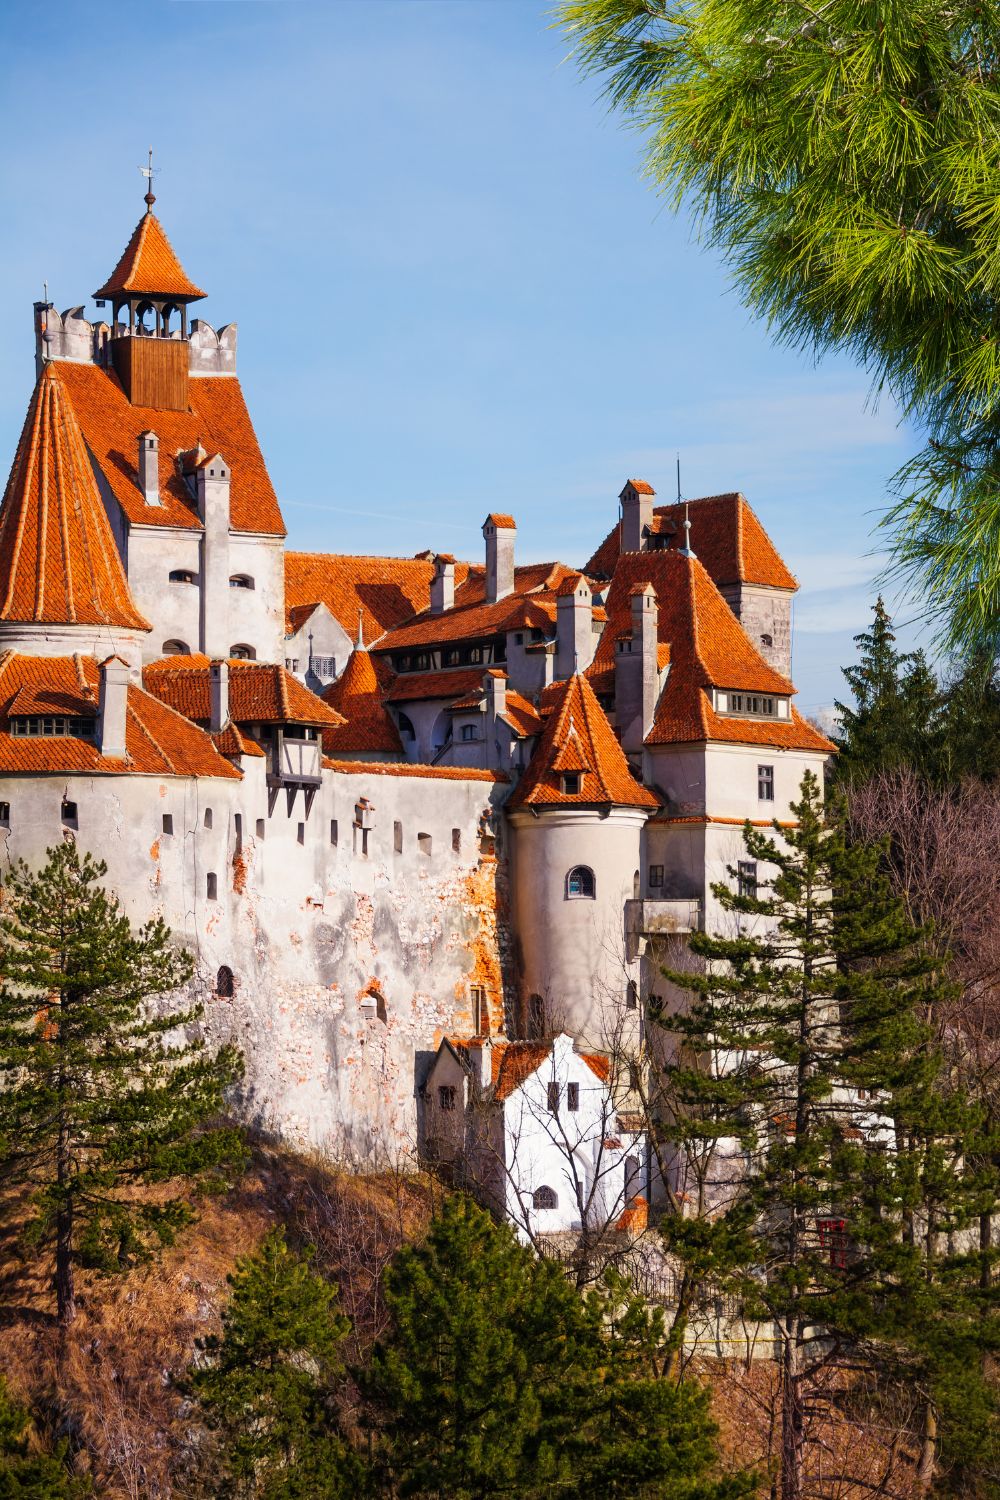 The imposing Bran Castle set against a backdrop of autumn trees in Transylvania